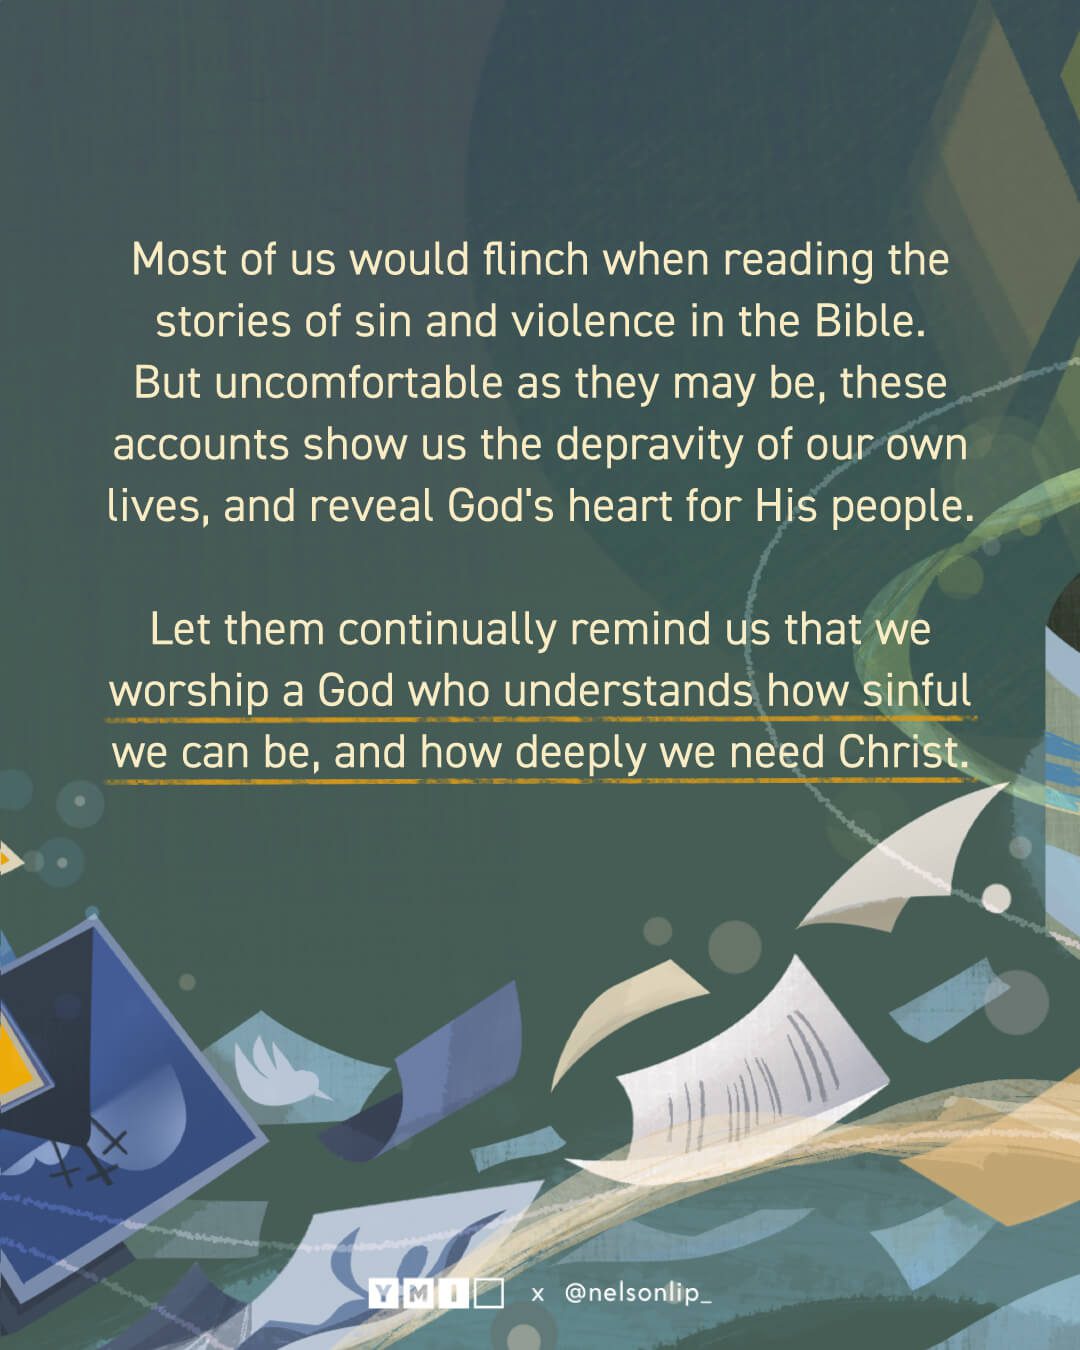 Background with the text of "Most of us would flinch when reading the stories of sin and violence in the Bible. But uncomfortable as they may be, these accounts show us the depravity of our own lives, and reveal God’s heart for His people. Let them continually remind us that we worship a God who understands how sinful we can be, and how deeply we need Christ. "